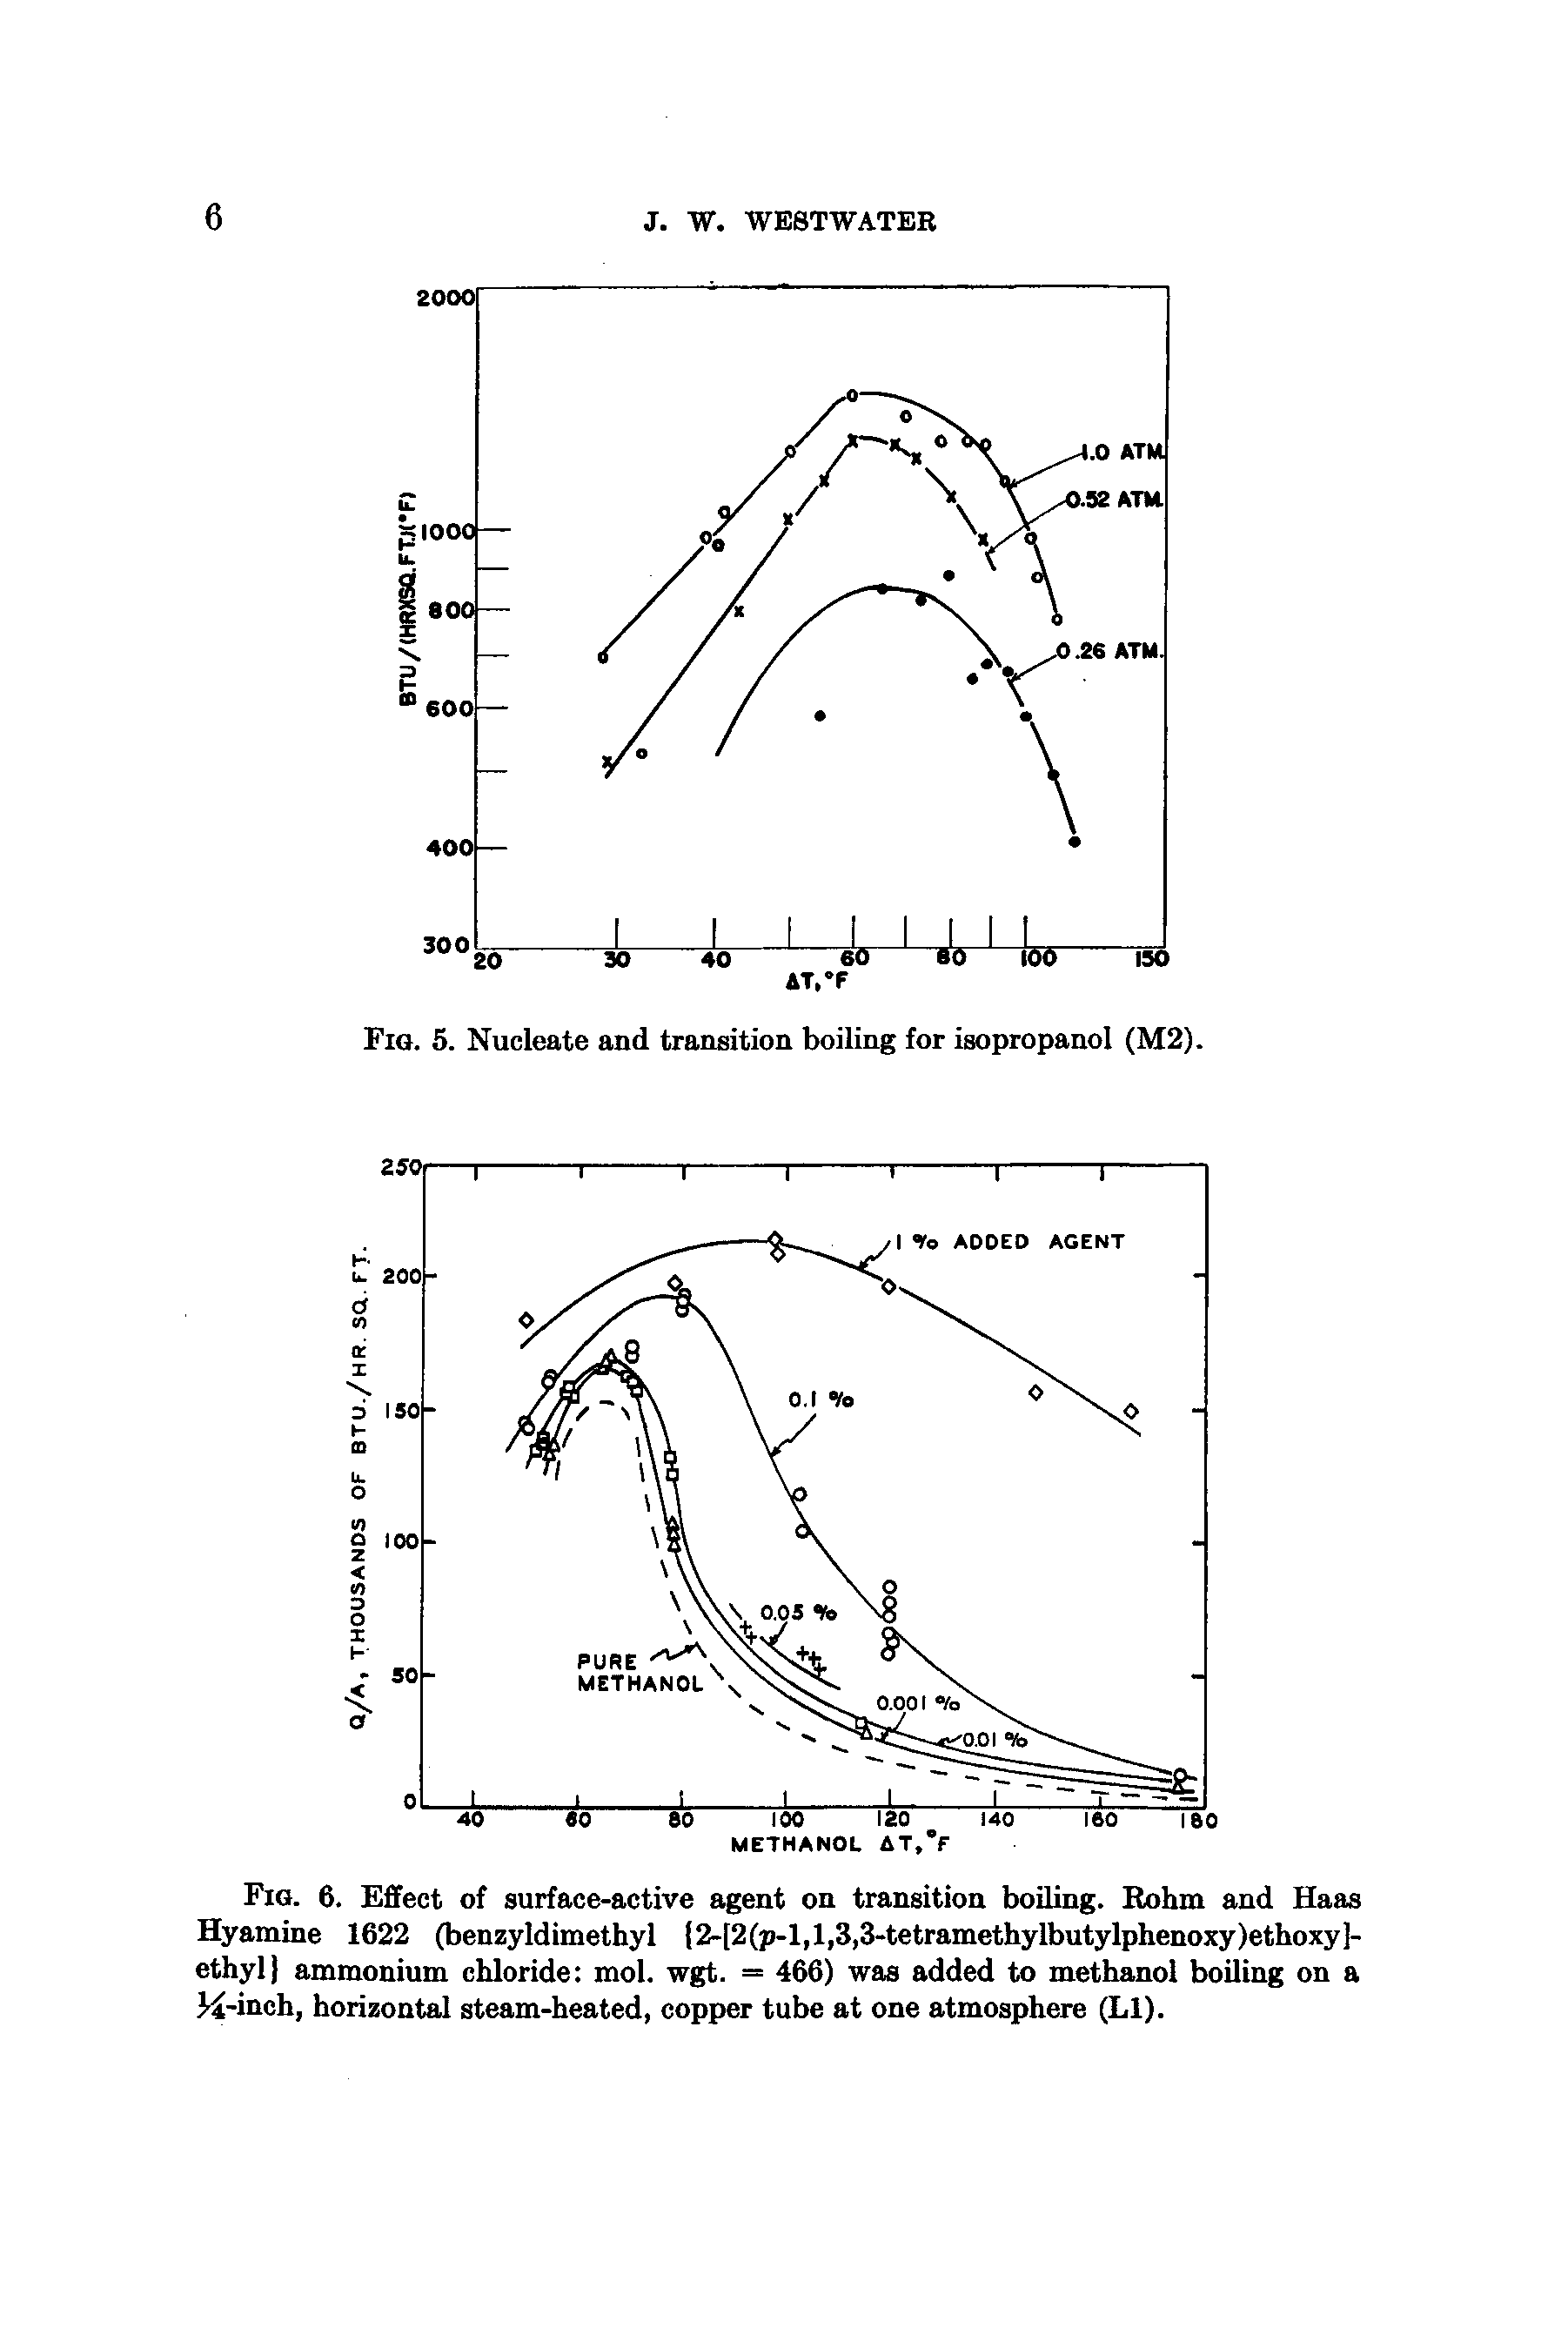 Fig. 6. Effect of surface-active agent on transition boiling. Rohm and Haas Hyamine 1622 (benzyldimethyl 2-[2(p-l,l,3,3-tetramethylbutylphenoxy)ethoxy]-ethyl ammonium chloride mol. wgt. = 466) was added to methanol boiling on a Ji-inch, horizontal steam-heated, copper tube at one atmosphere (LI).